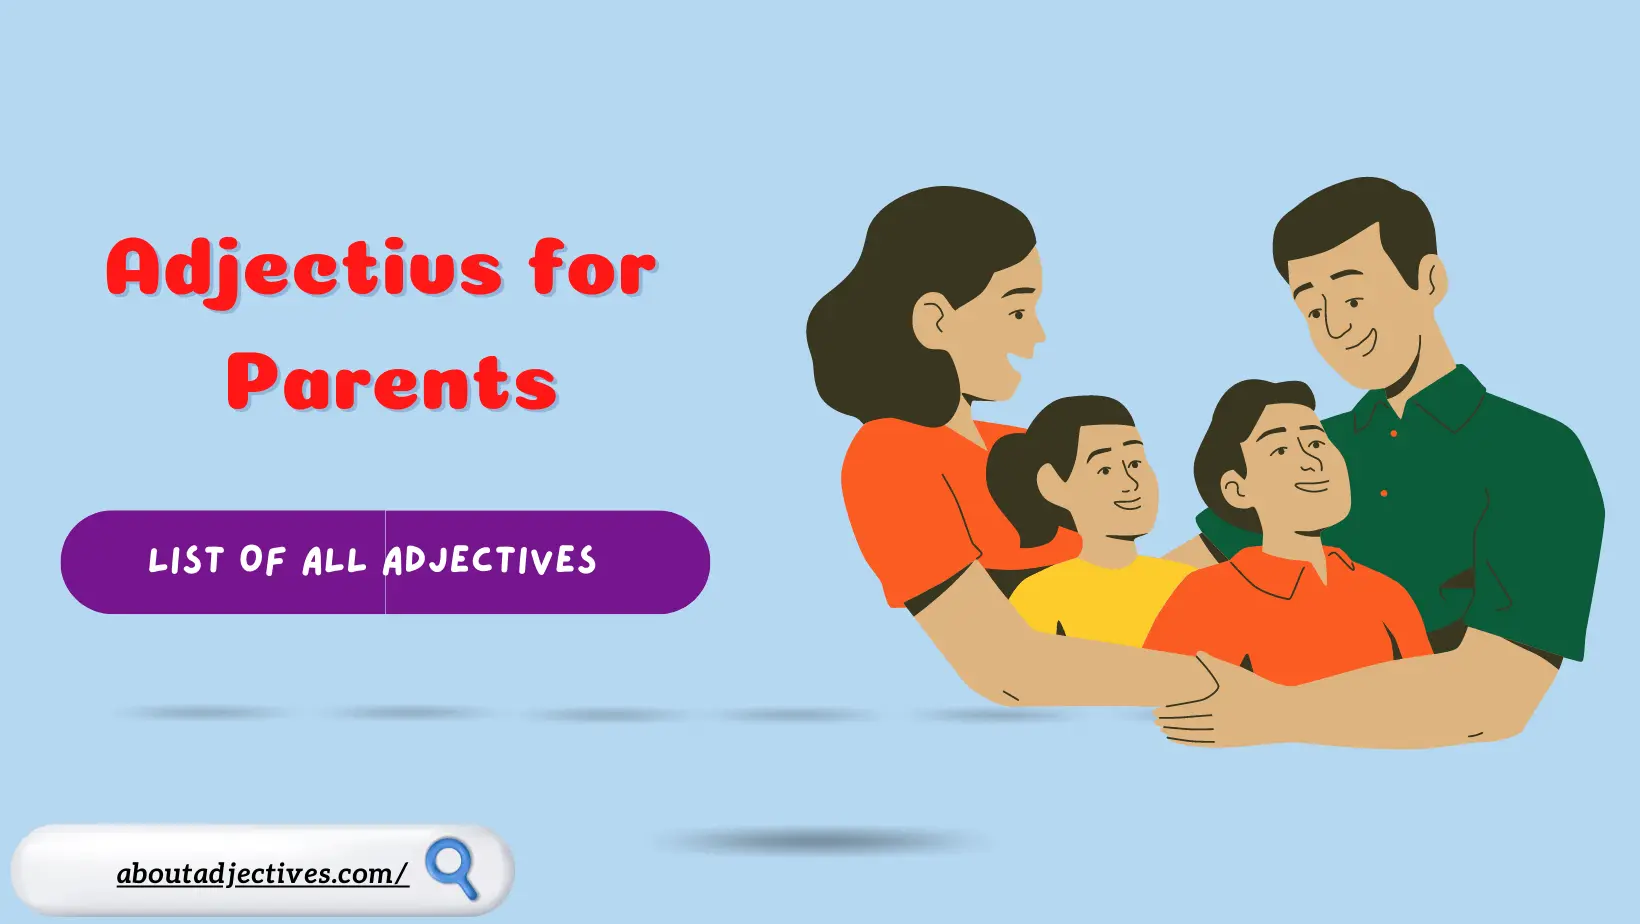 Adjectives for Parents